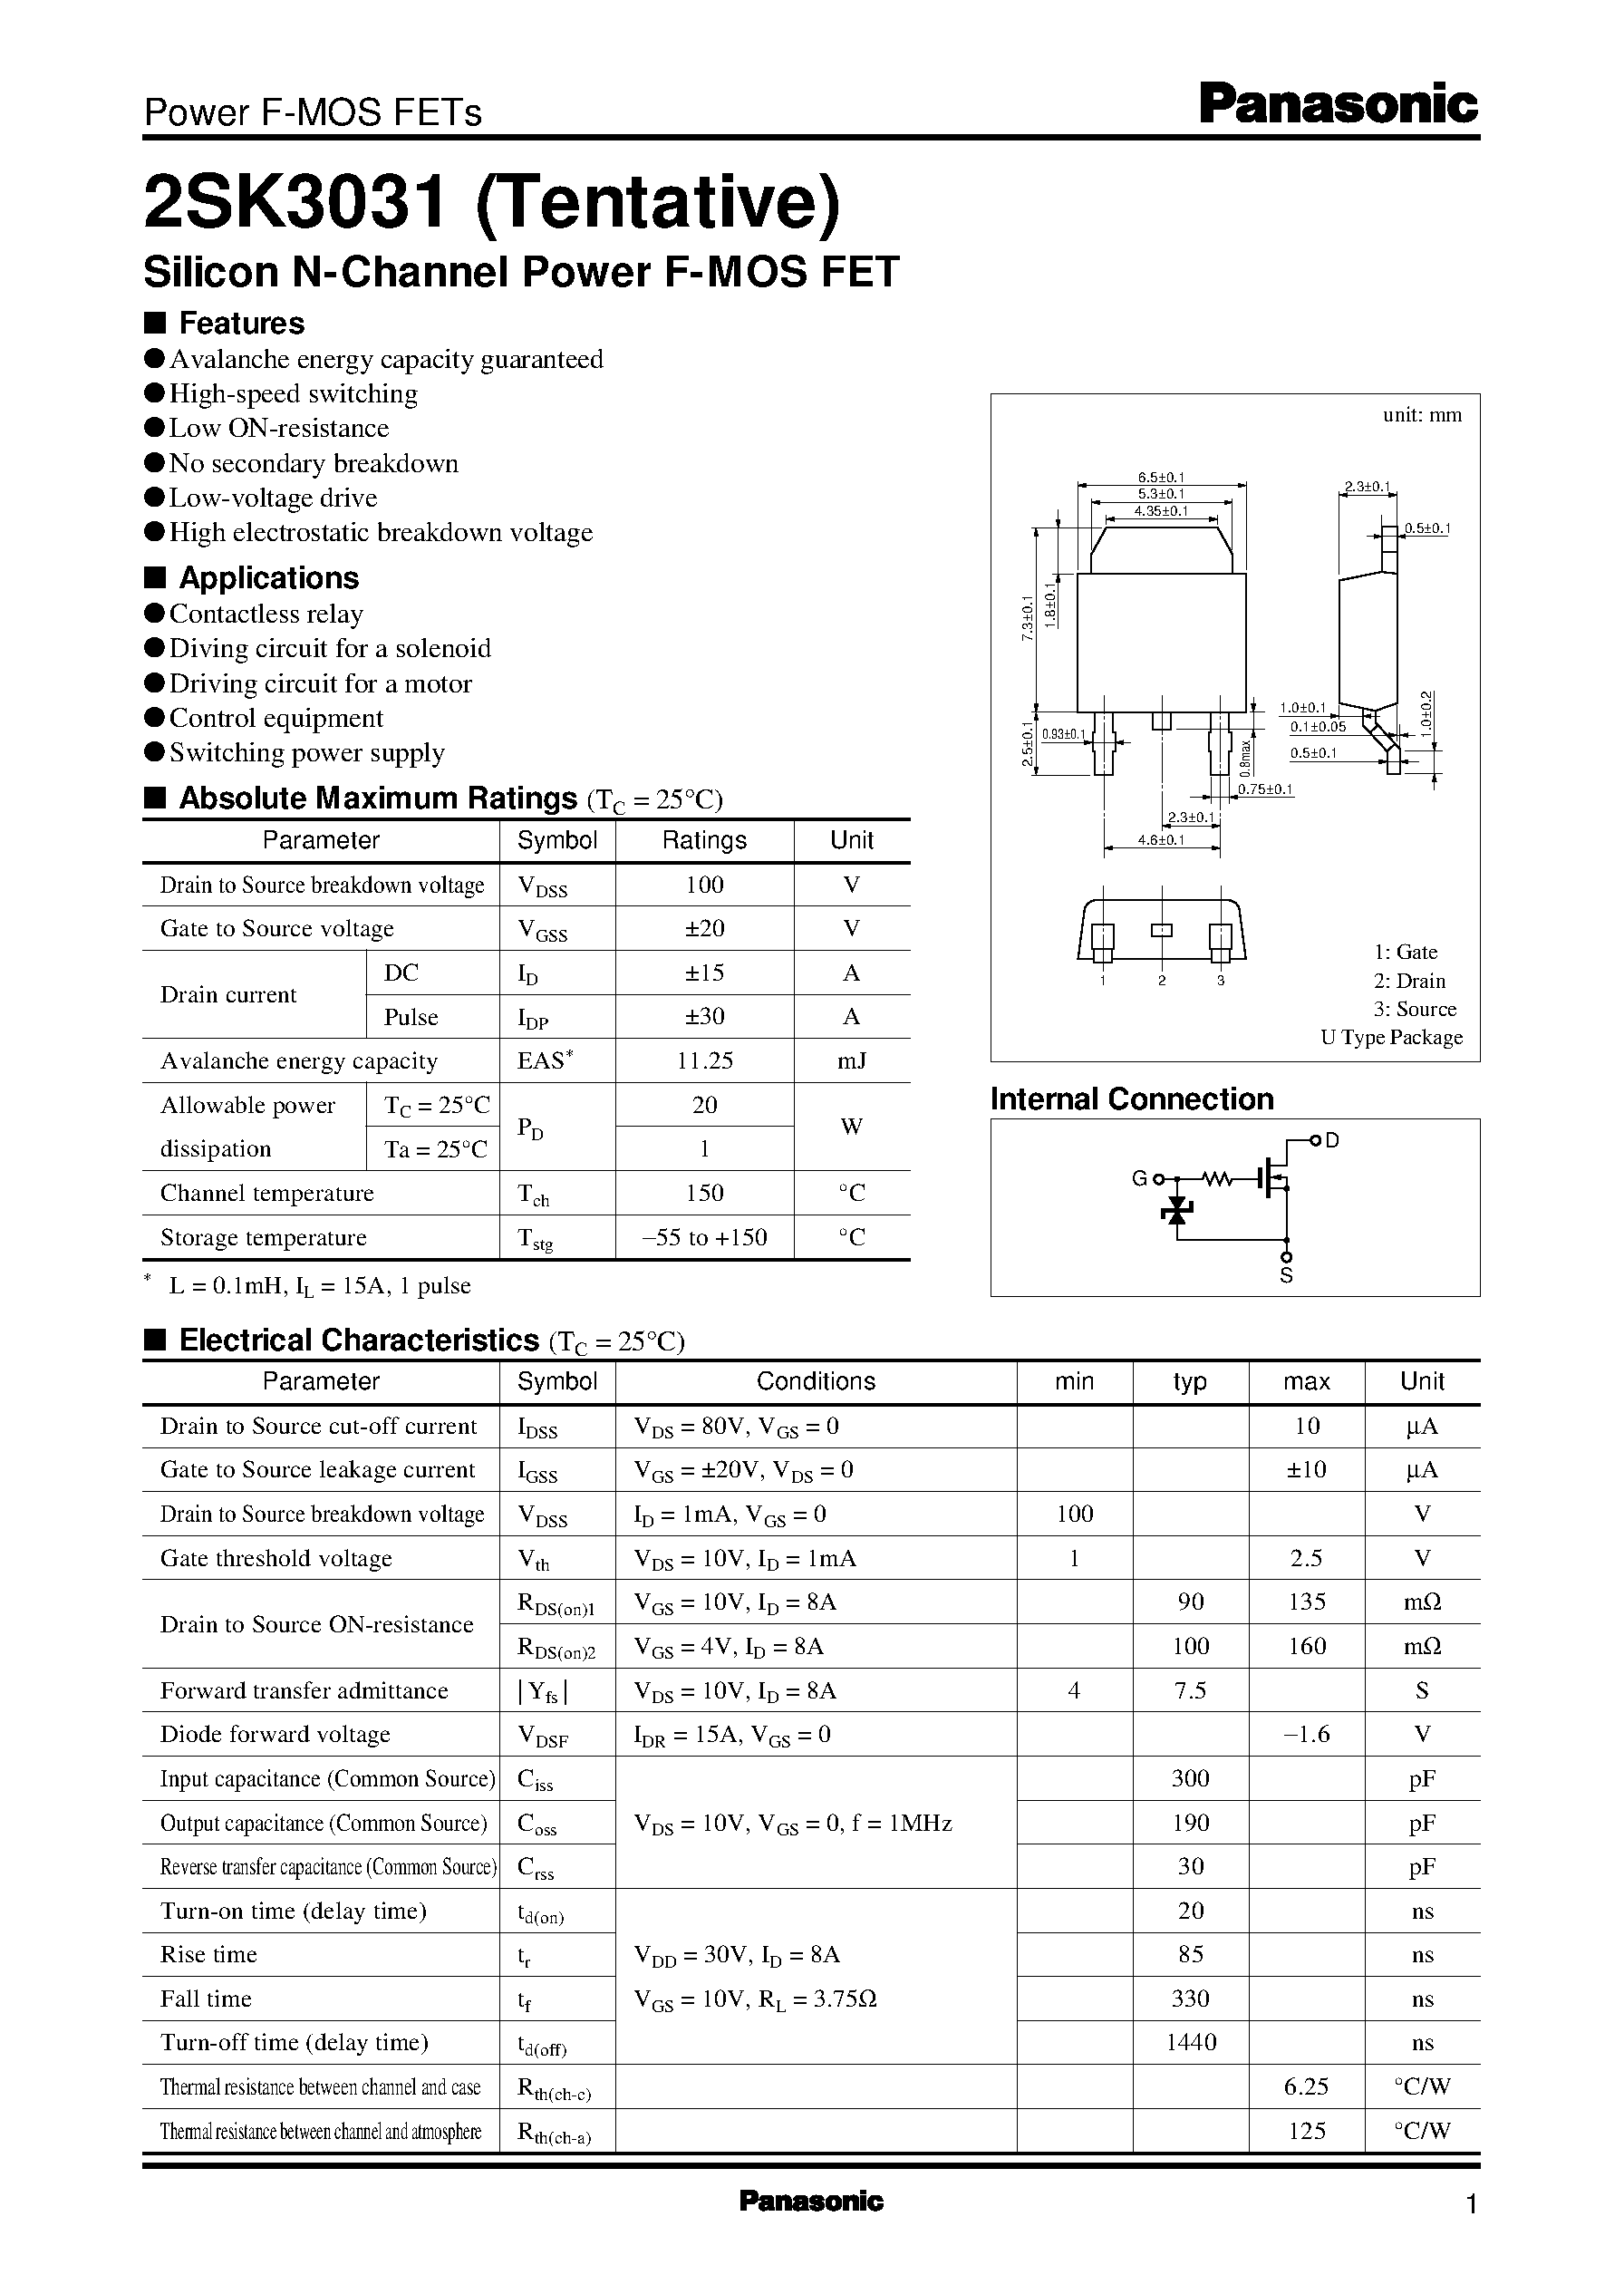 Datasheet 2SK3031 - Silicon N-Channel Power F-MOS FET page 1